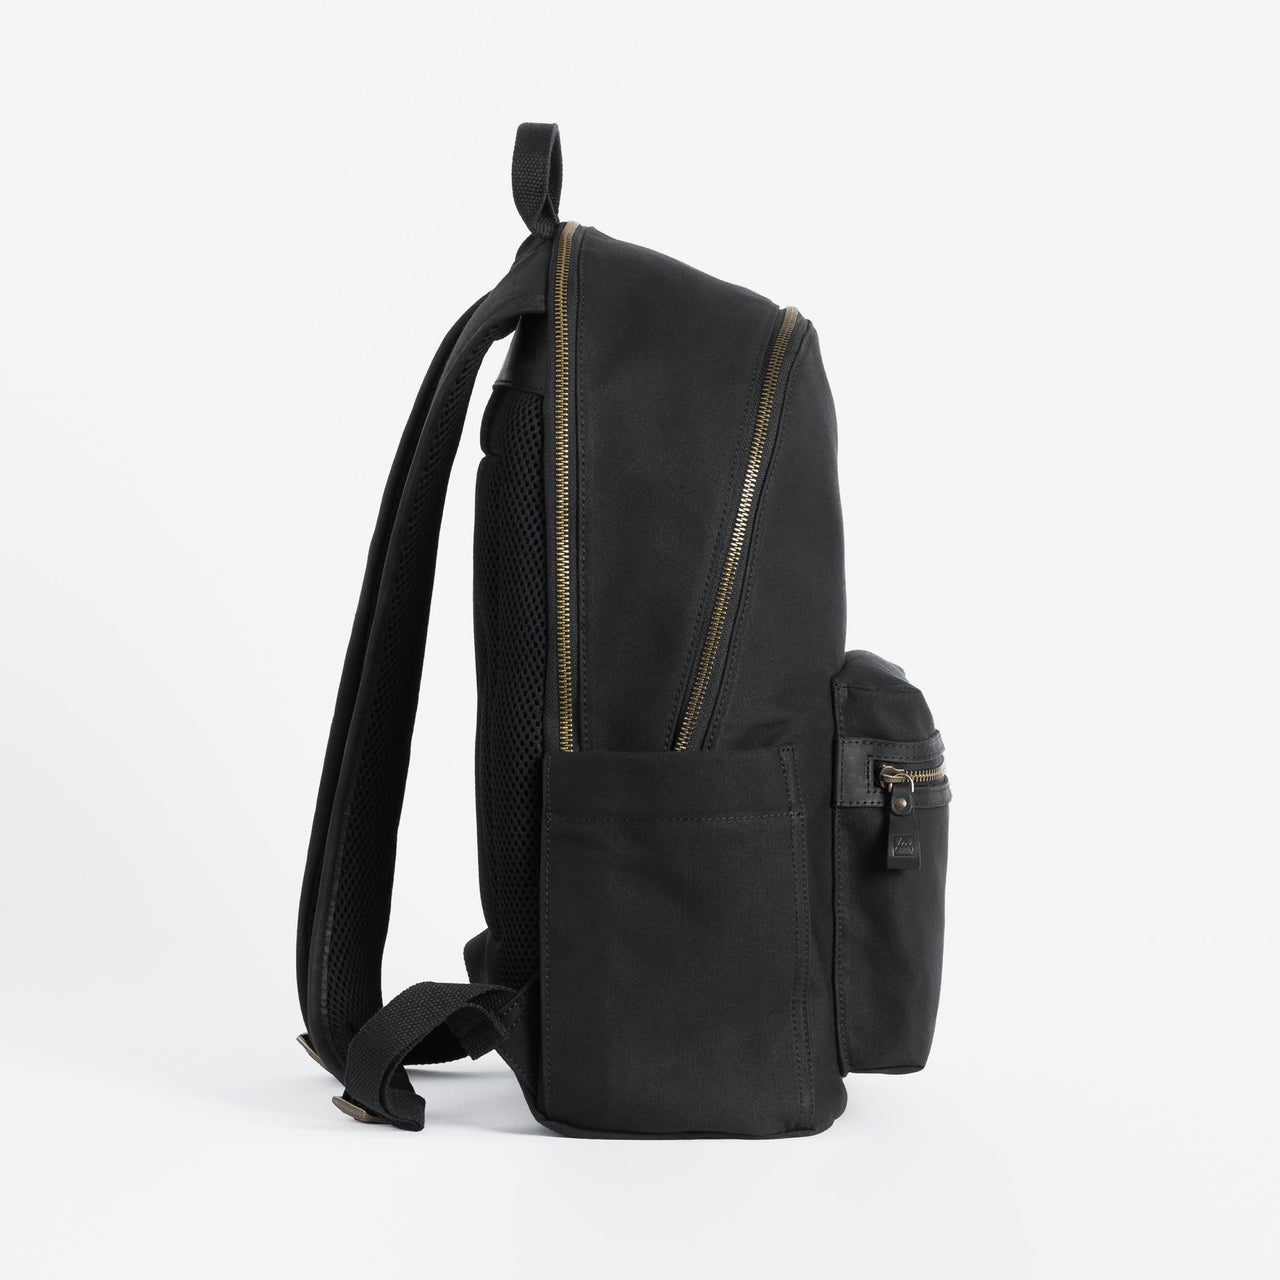 The Commuter Backpack in Black and Gold